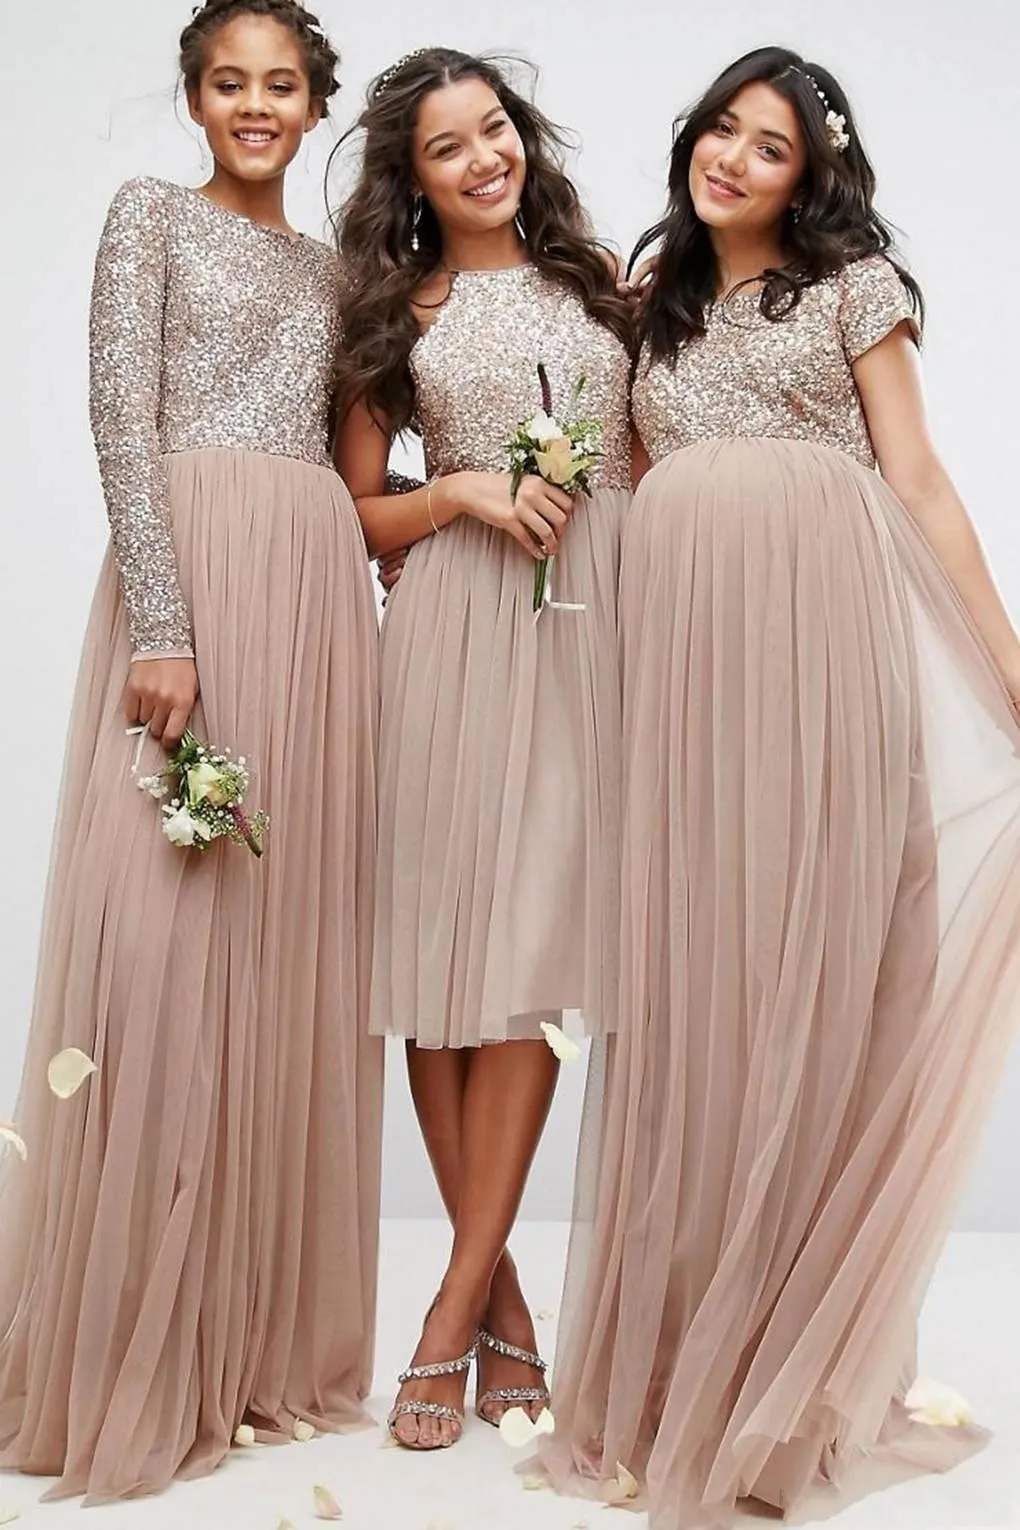 2020 Sexy Sequined Country Bridesmaid Dresses Cheap Three Styles Sequined Top Tulle Short And Long Length Plus Size Wedding Guest Gowns